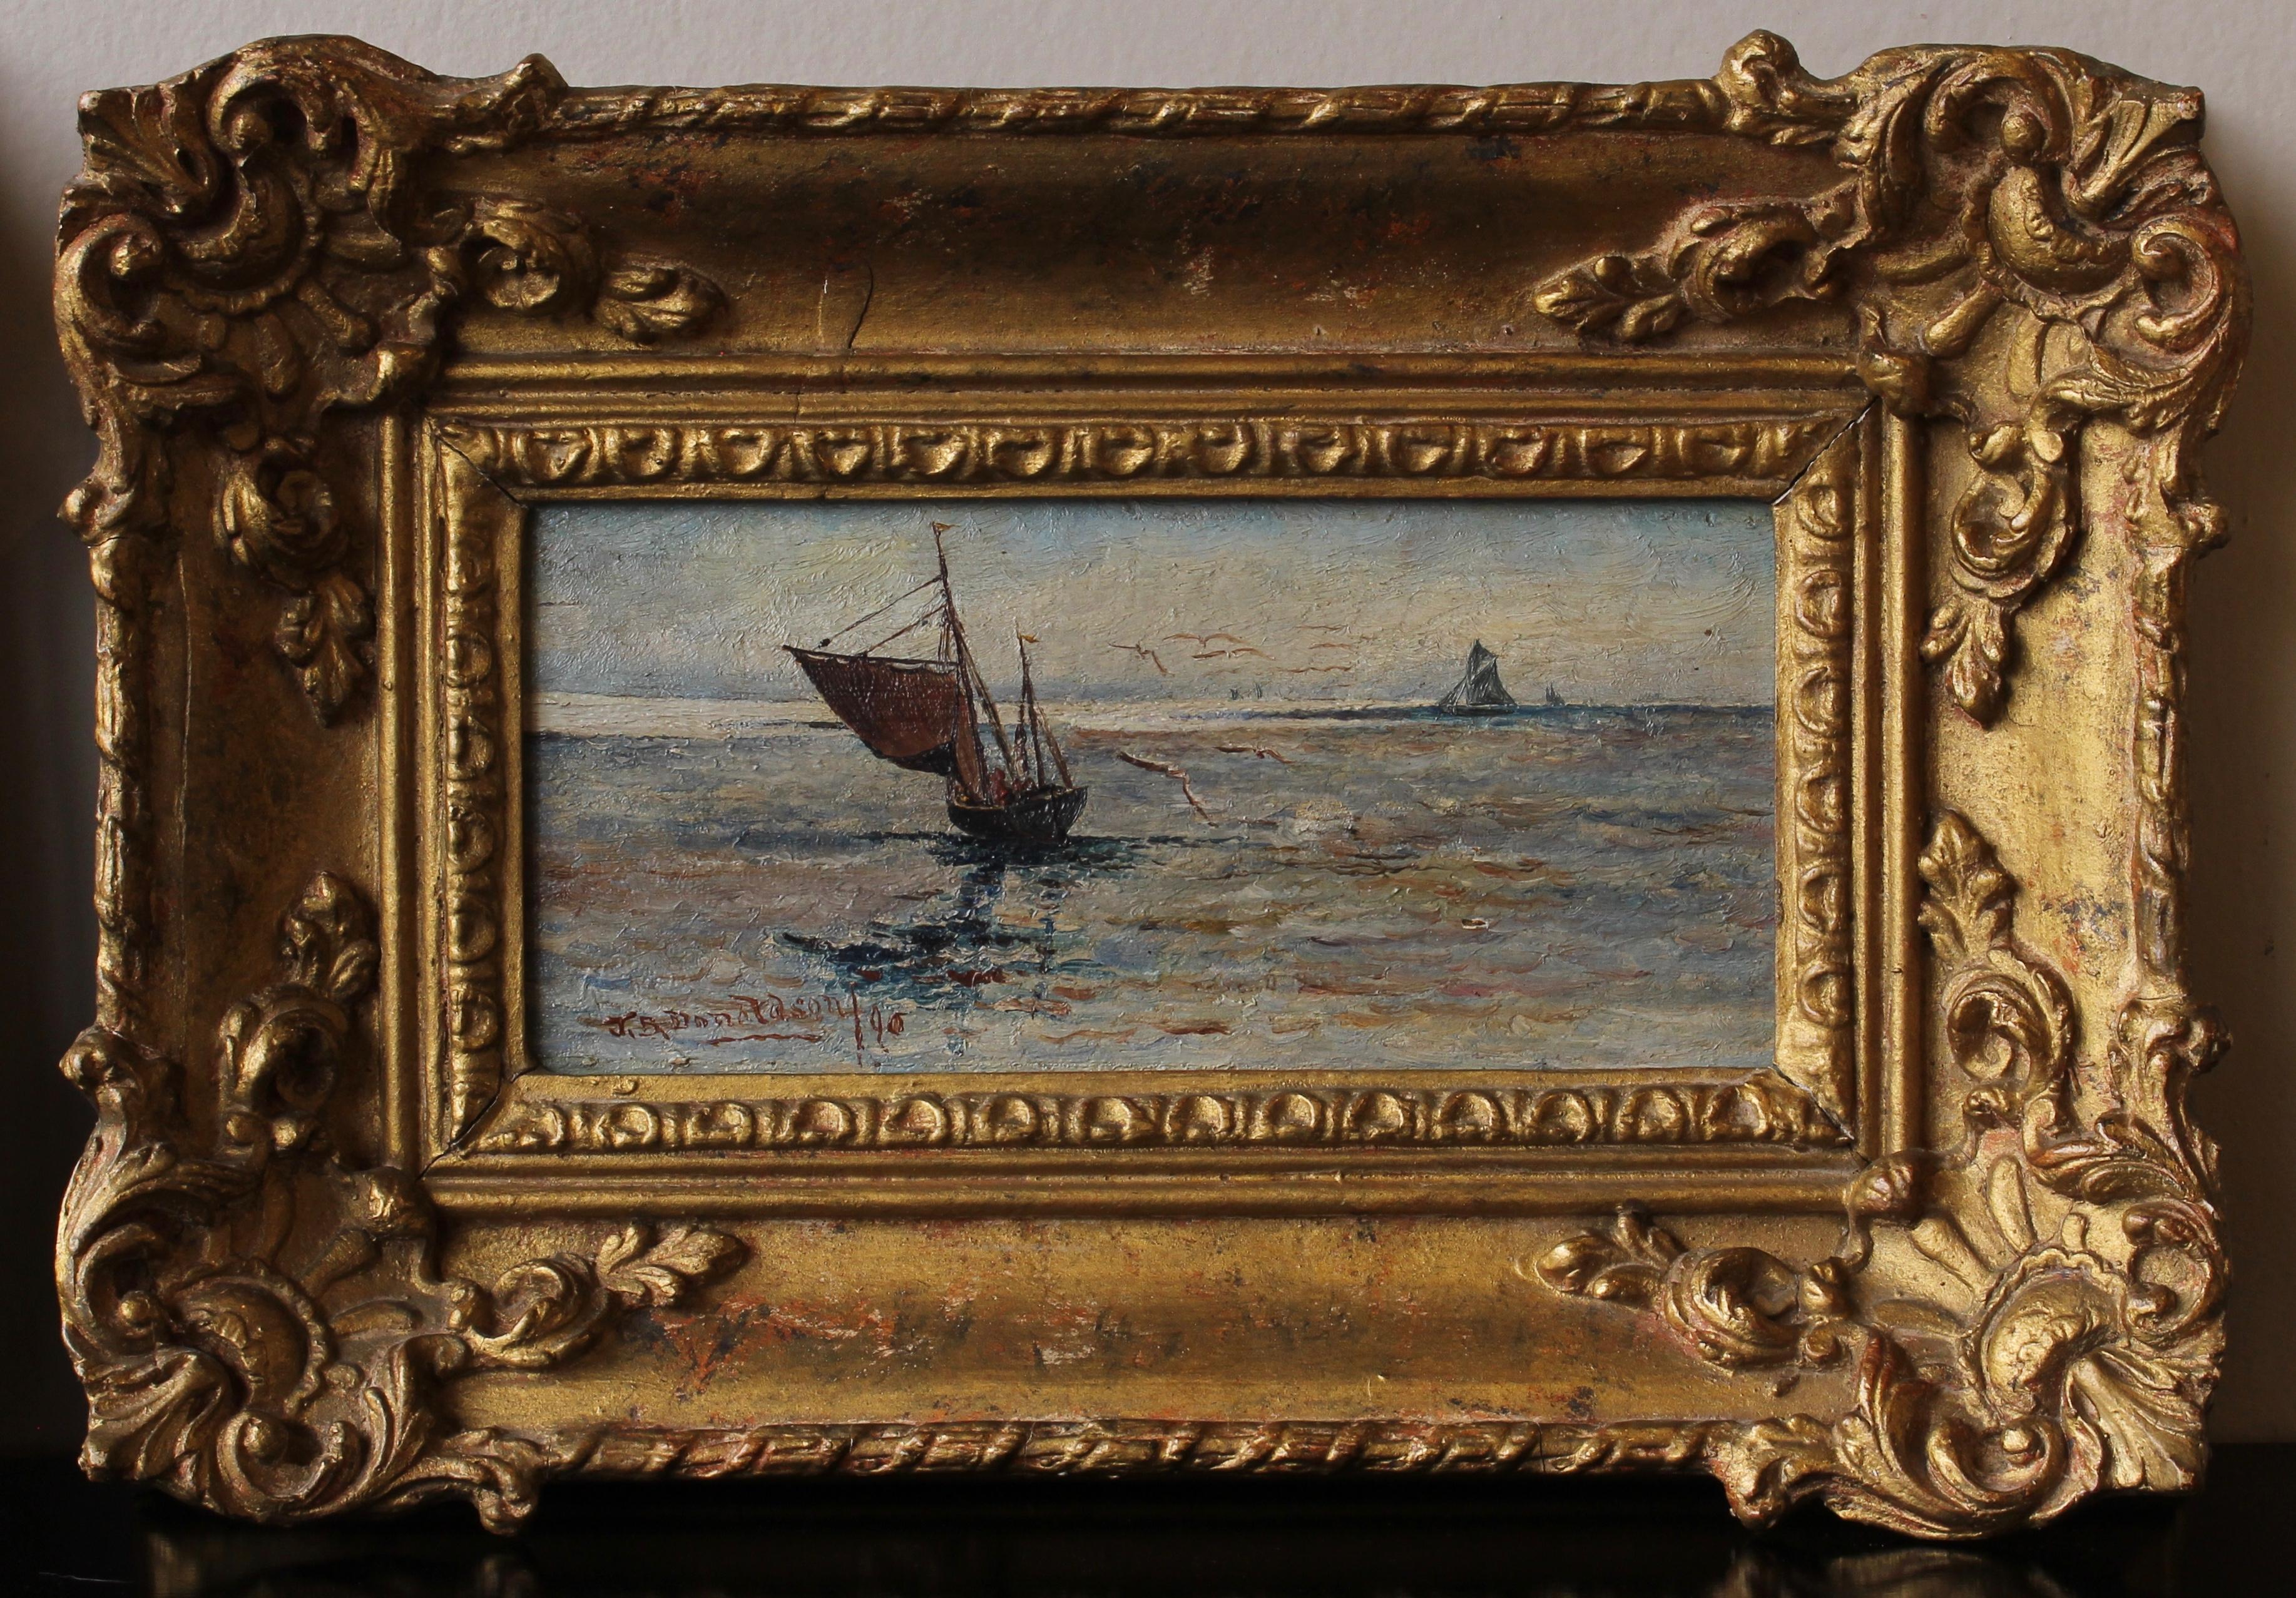 A charming companion pair of late 19th century English oil on board seascapes by J. D. Donaldson signed and dated 1890 in original giltwood frames.